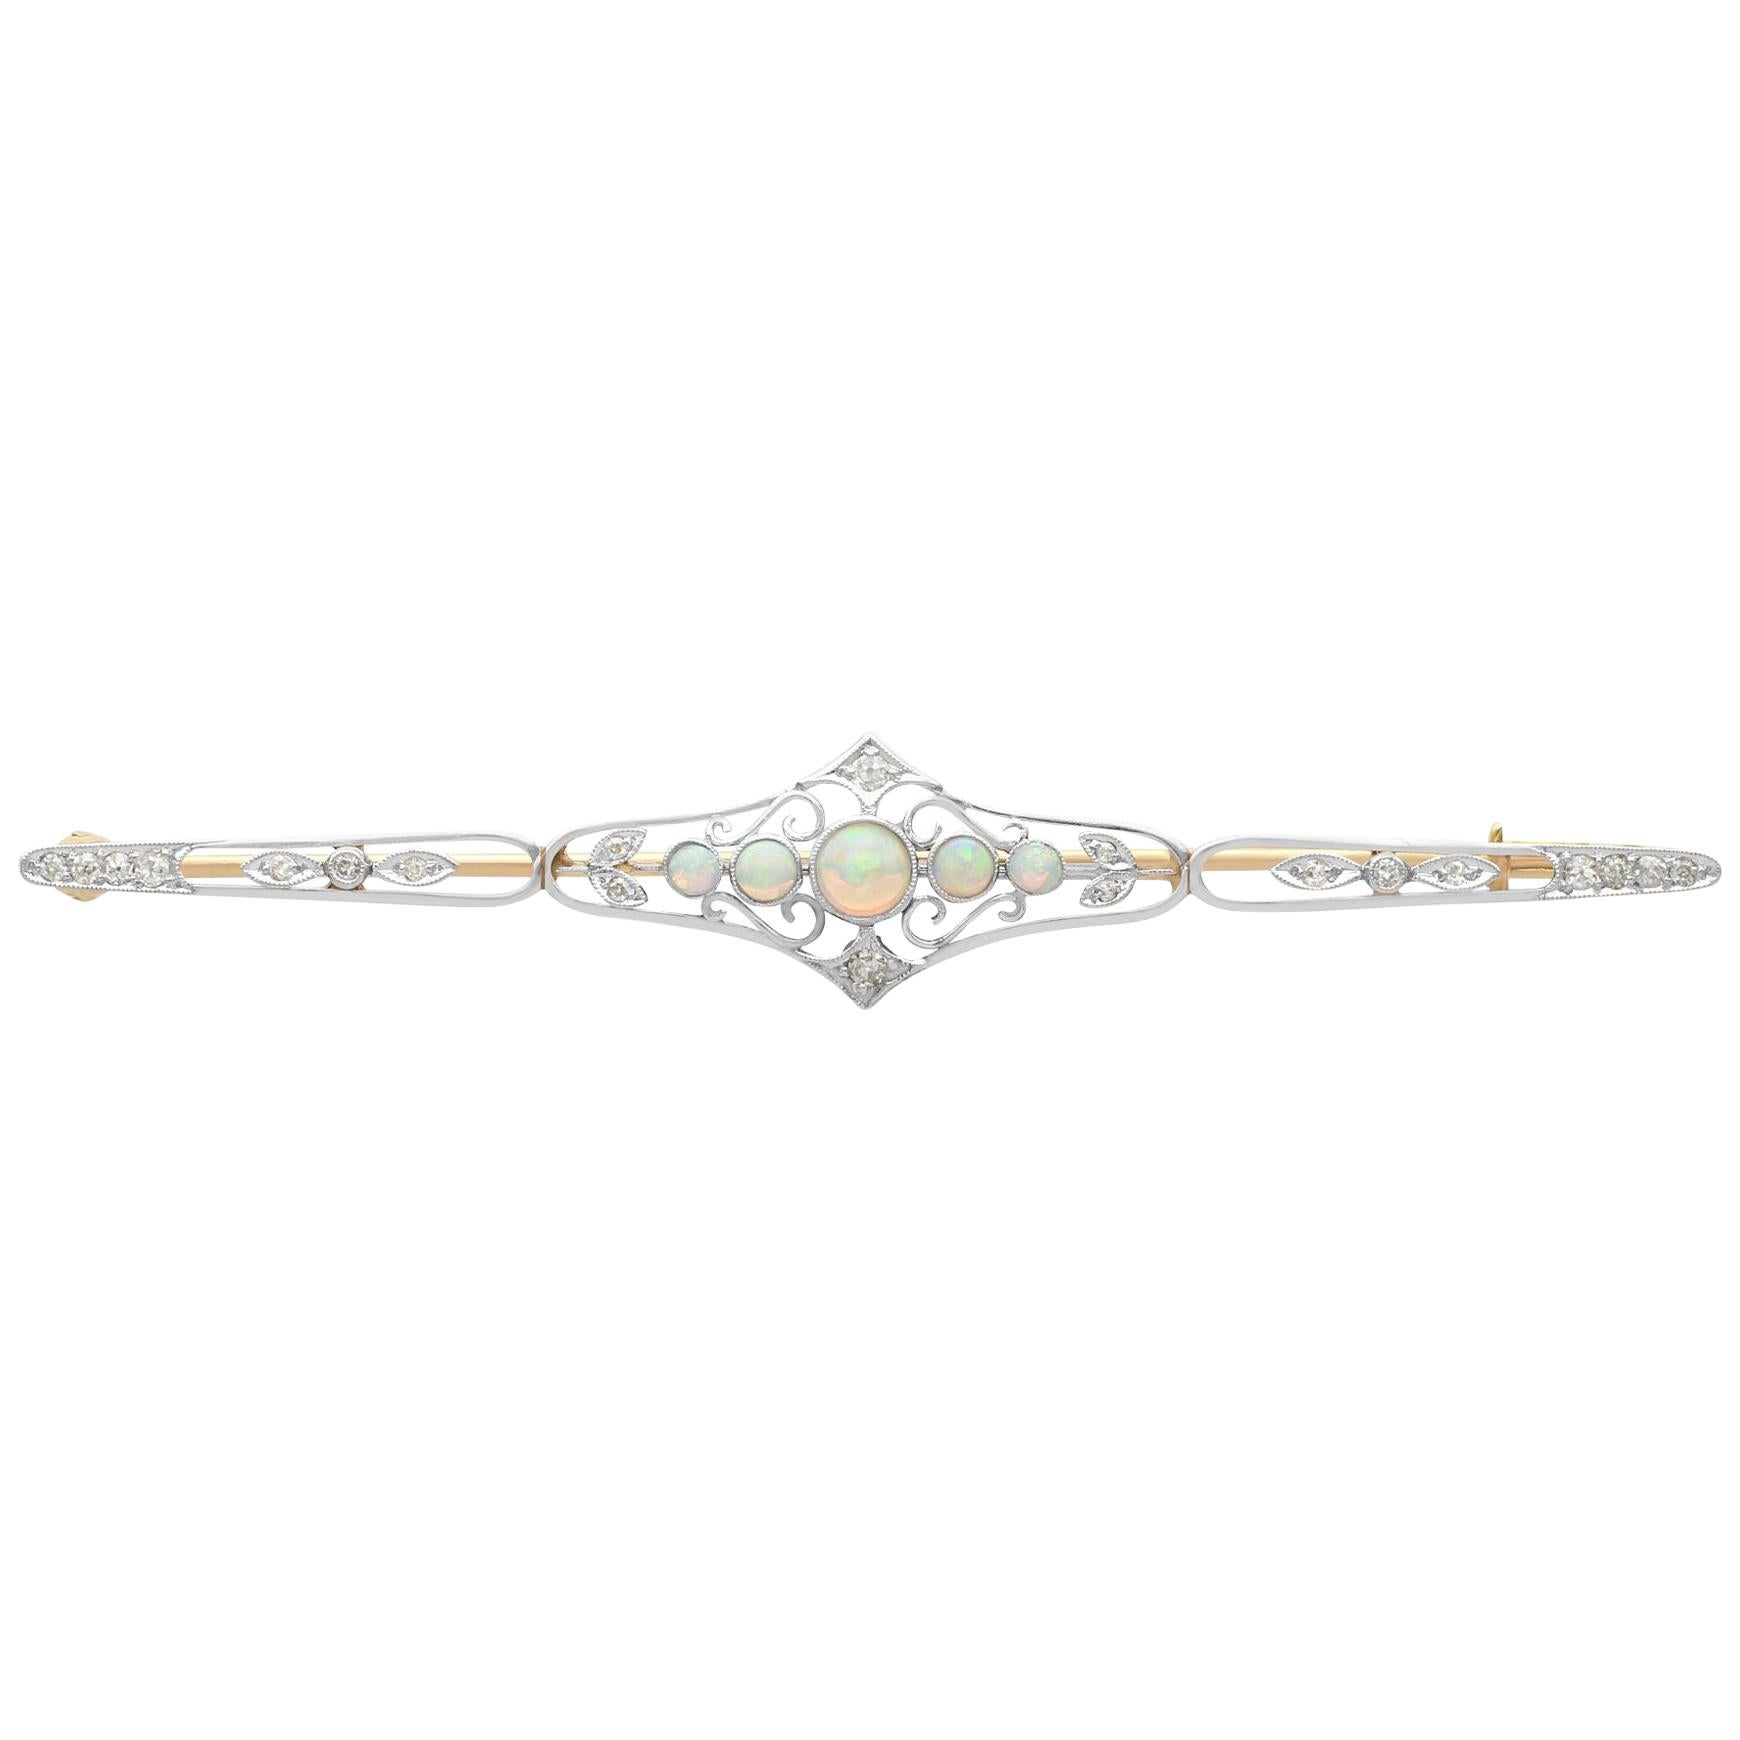 Antique Opal and Diamond Yellow Gold Brooch circa 1900